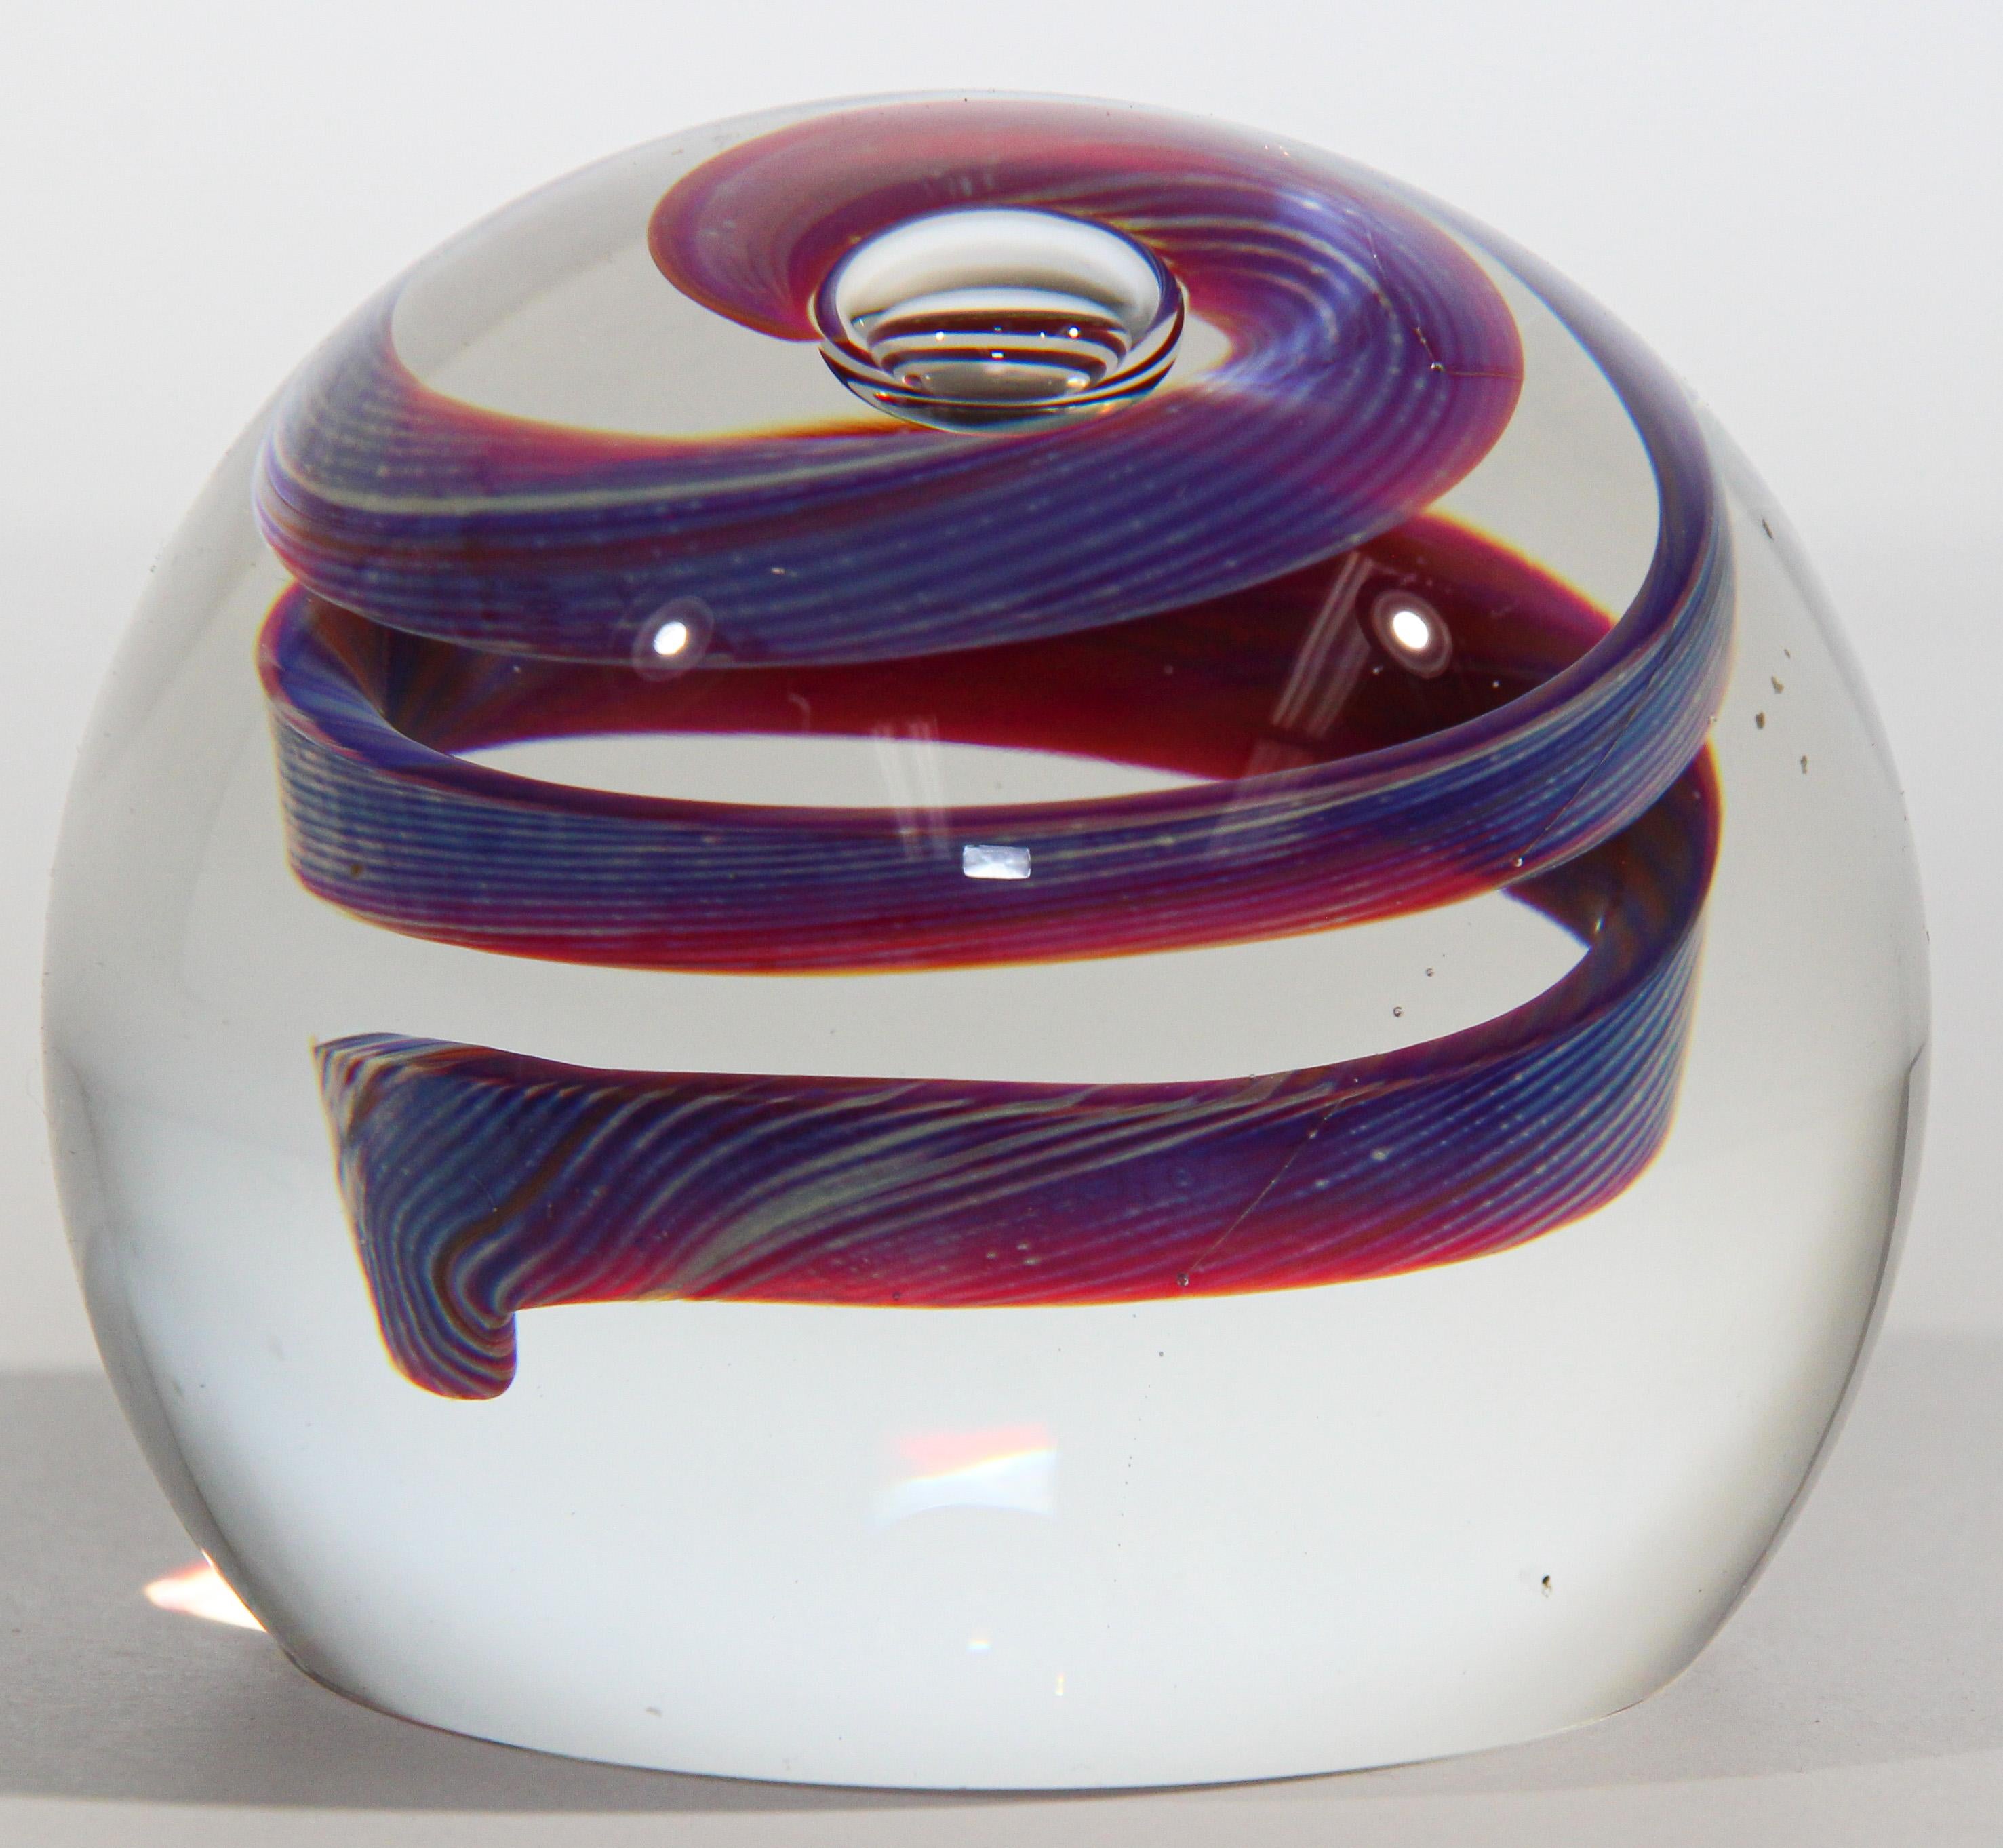 Gorgeous Vintage Scottish Art Glass 1999 abstract design paperweight. 
Beautiful pink and blue swirl paperweight. 
Colors are a blue, maroon, pink and clear. 
Engraved Glass Signed and dated 1999.
Hand made in Scotland
Diameter 2.5